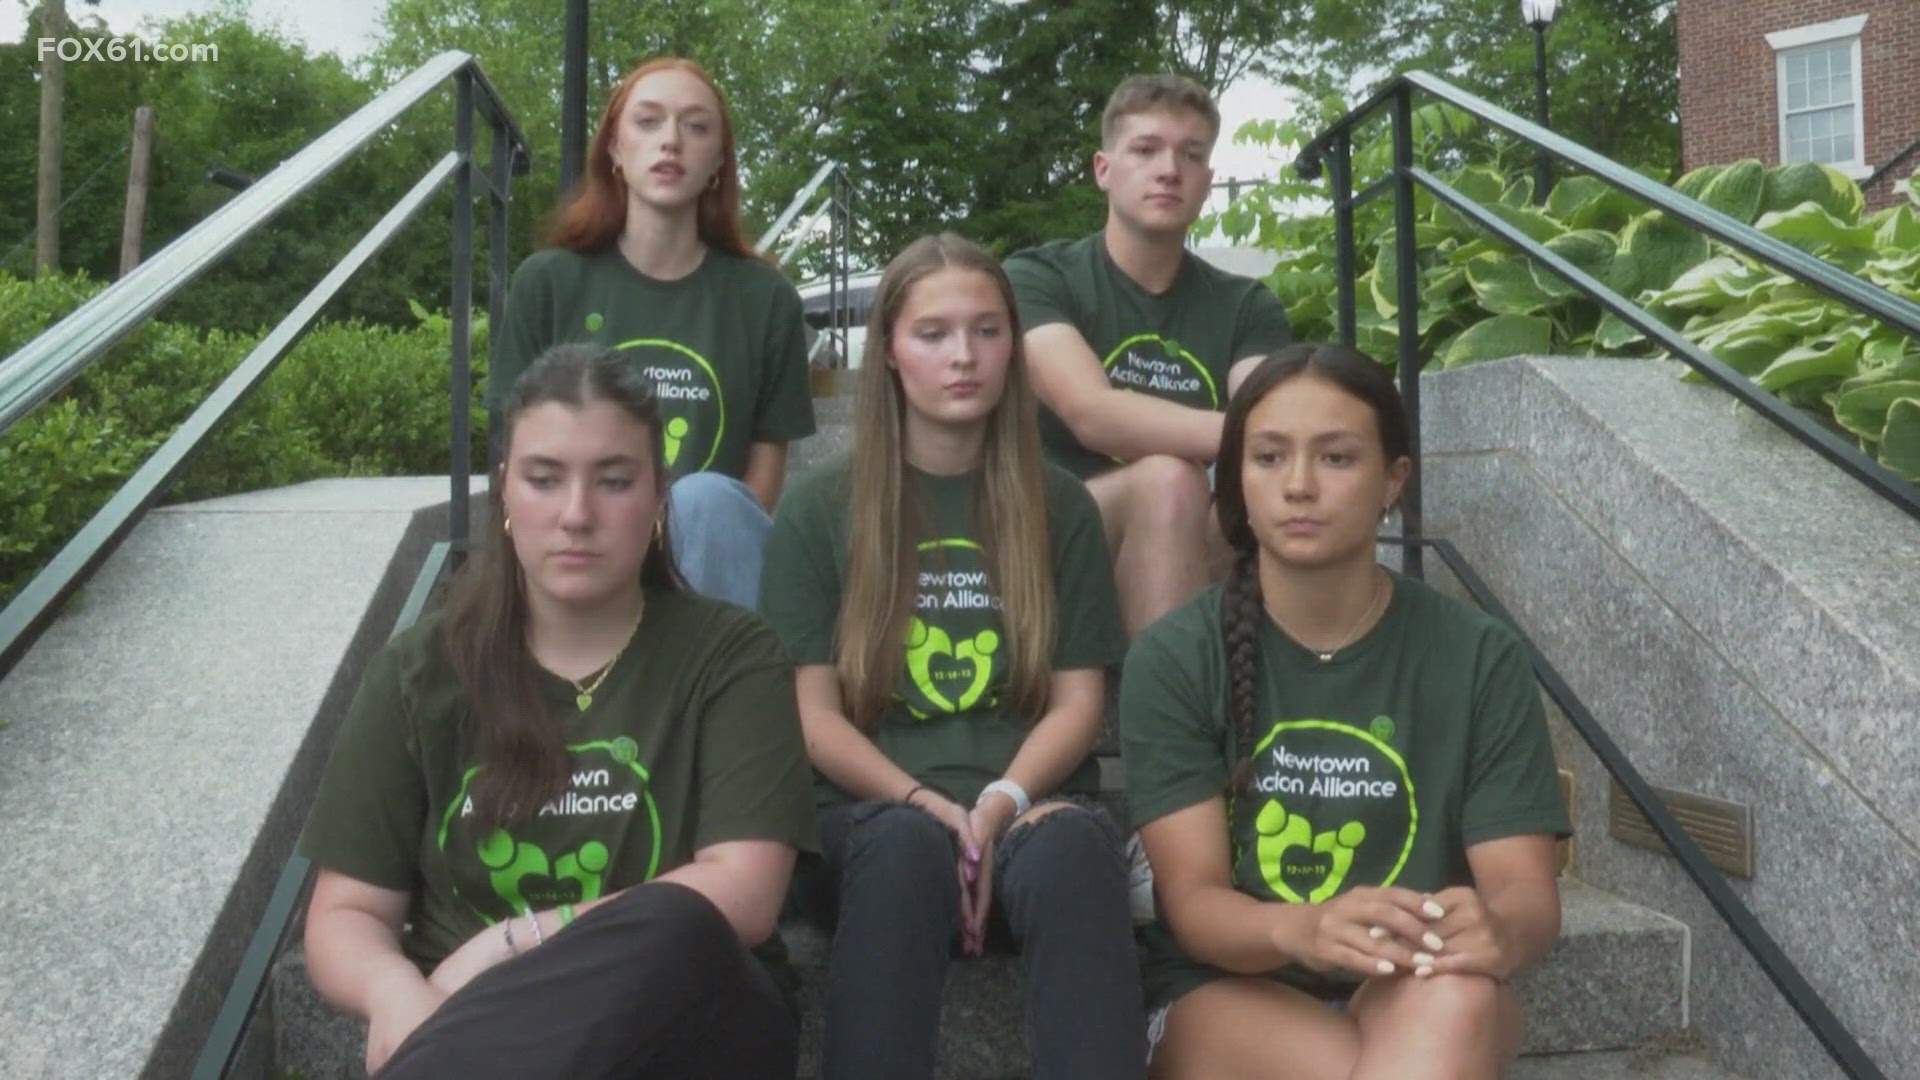 The children who survived the 2012 shooting at Sandy Hook Elementary School in Newtown, Connecticut, will be graduating high school with mixed emotions.